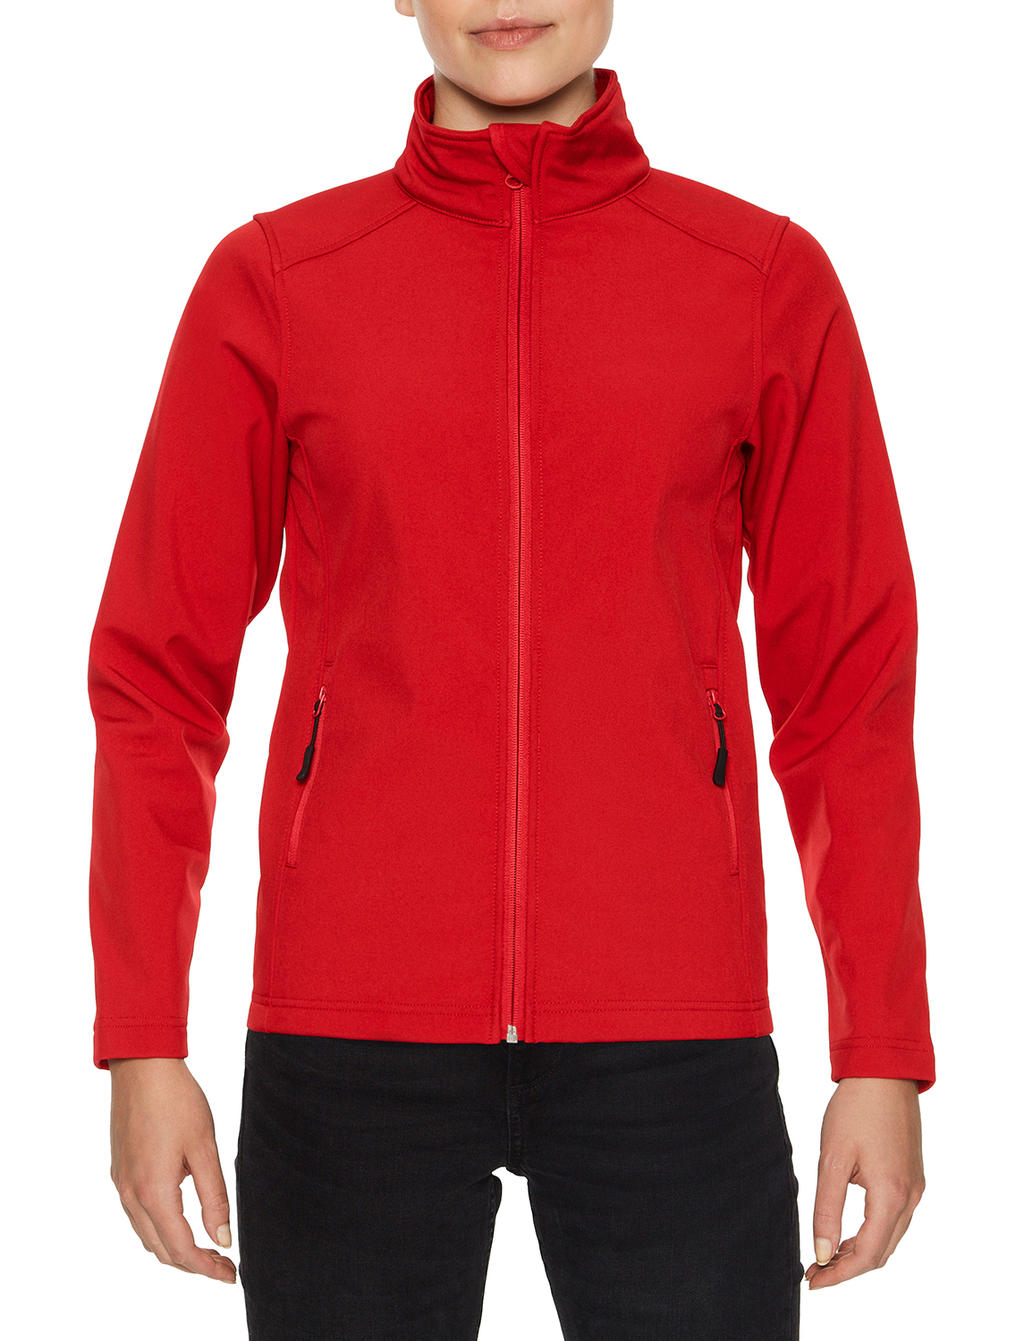  Hammer? Ladies Softshell Jacket in Farbe Red